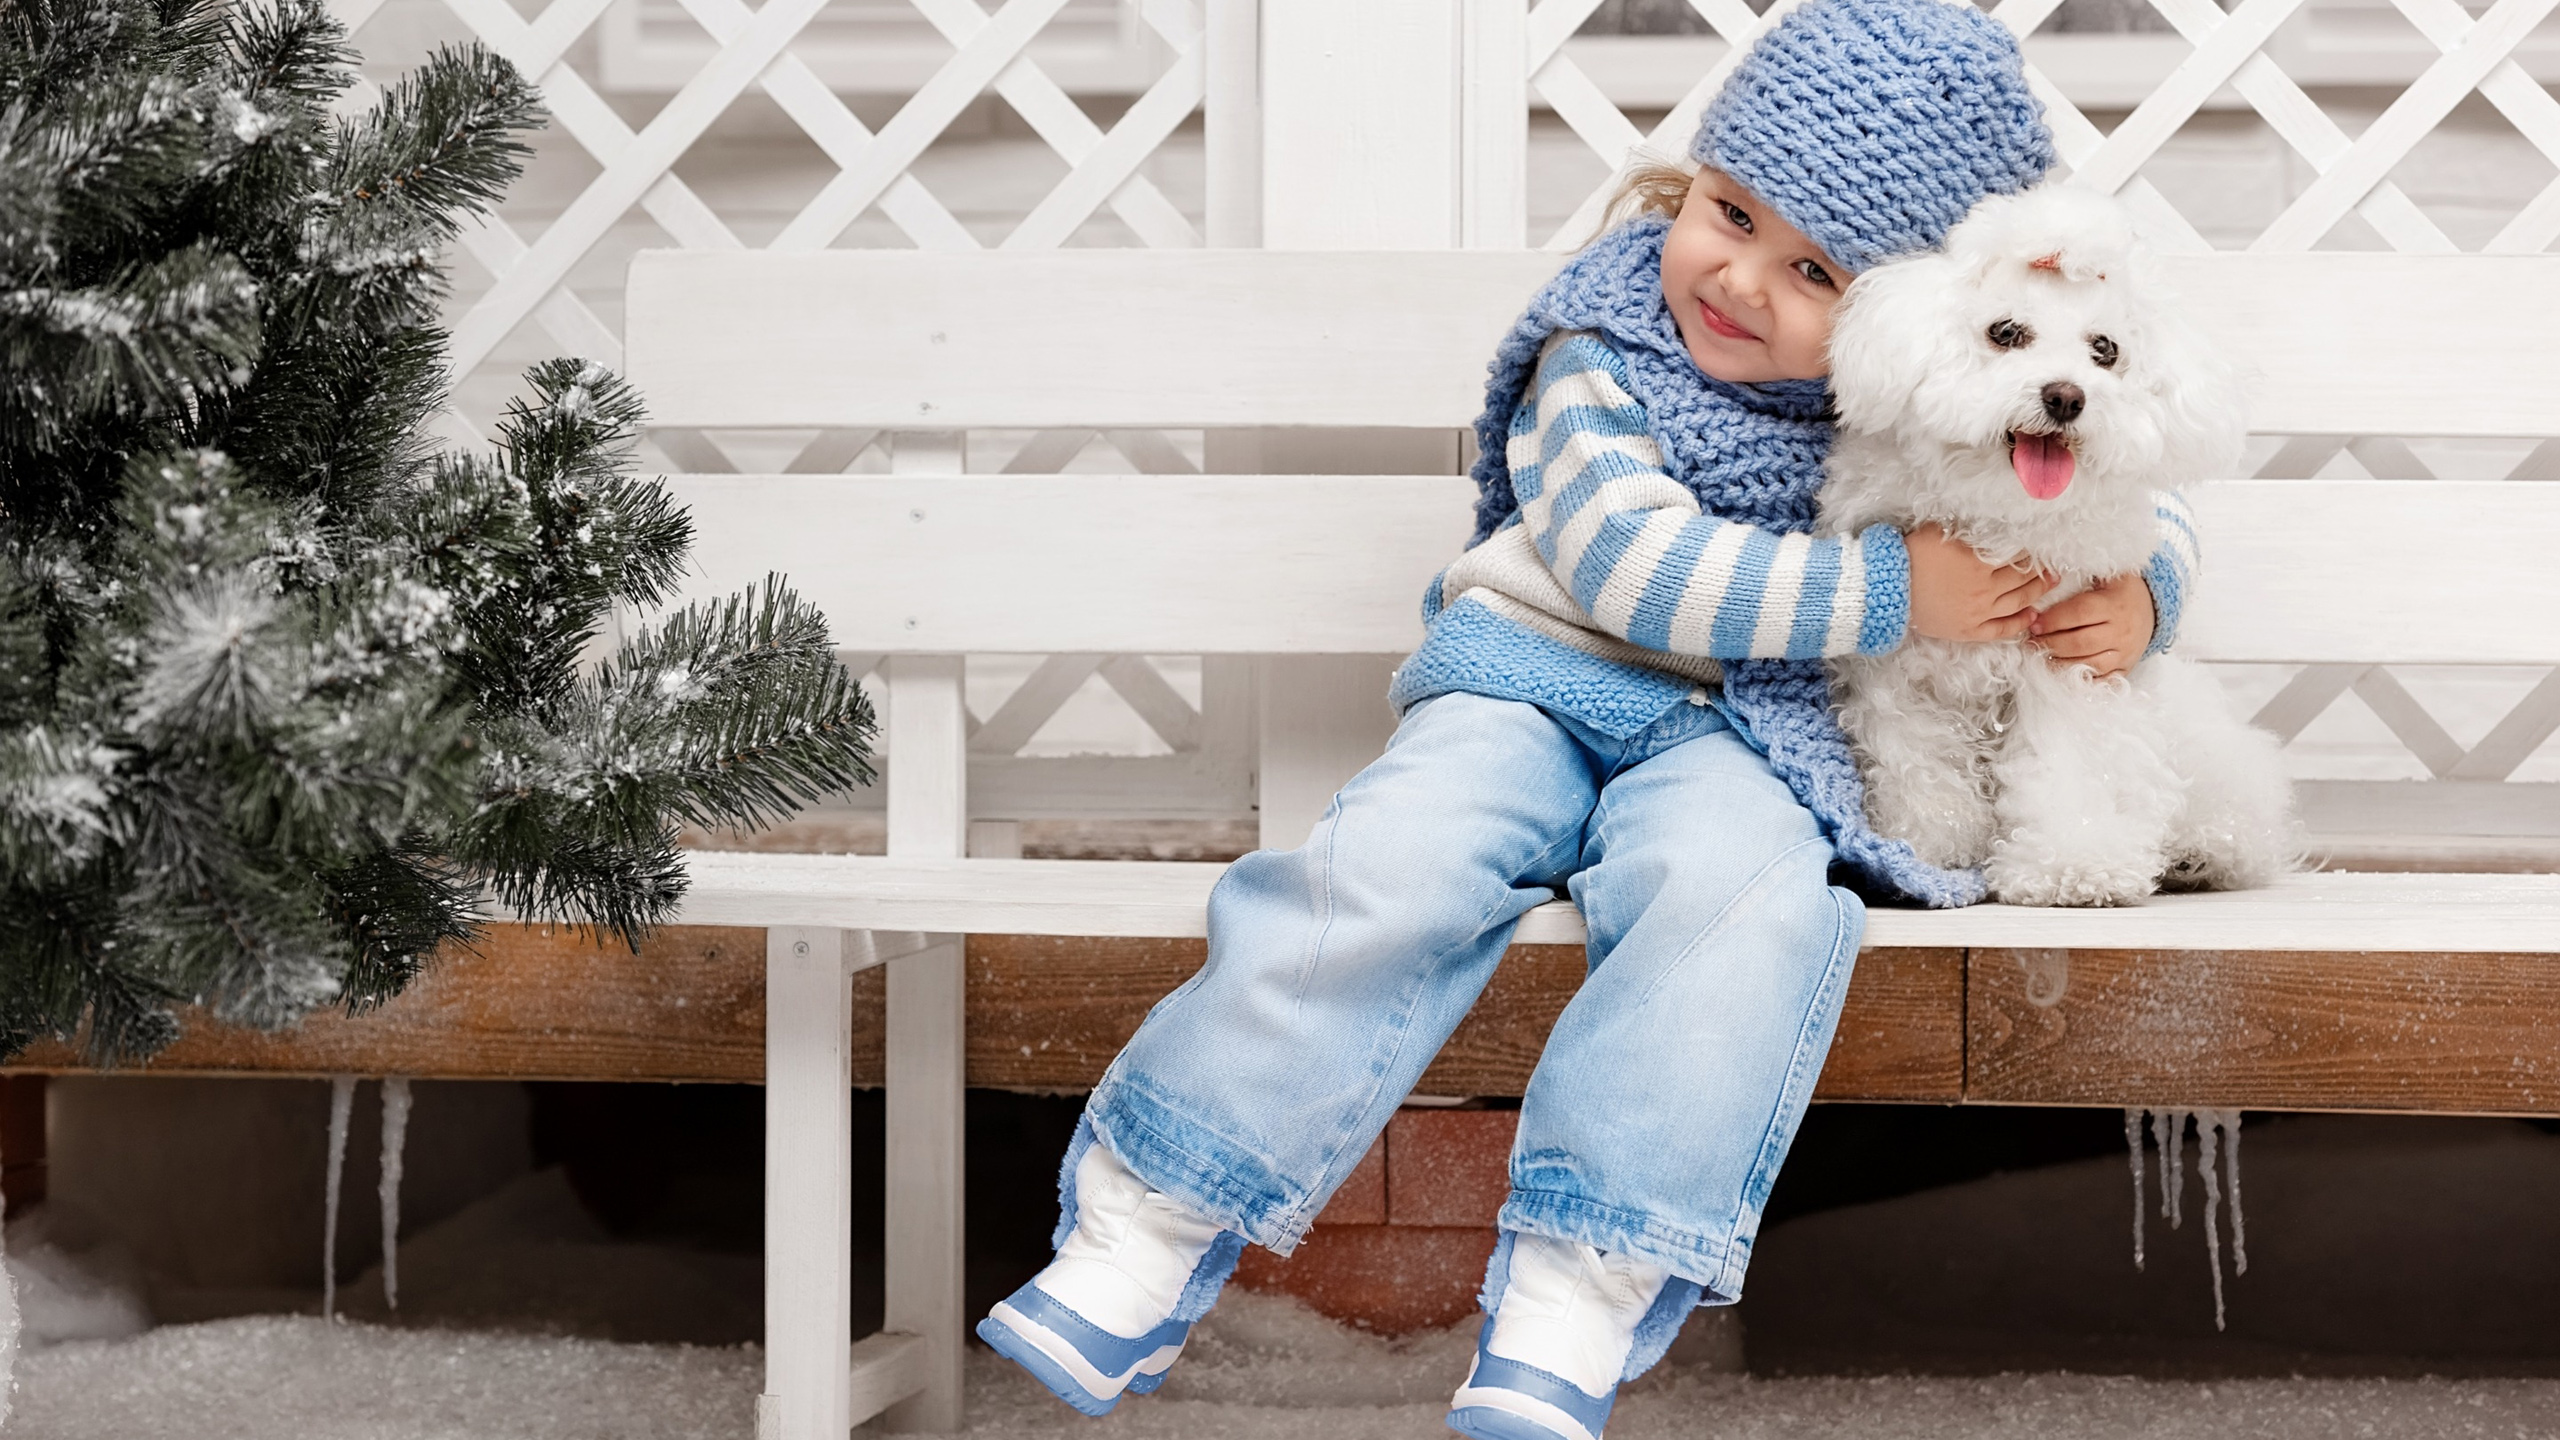 Cute Smiley Little Girl With Pet Dog Wearing Blue Striped Woolen Dress And Cap Sitting On White Bench 2K Cute